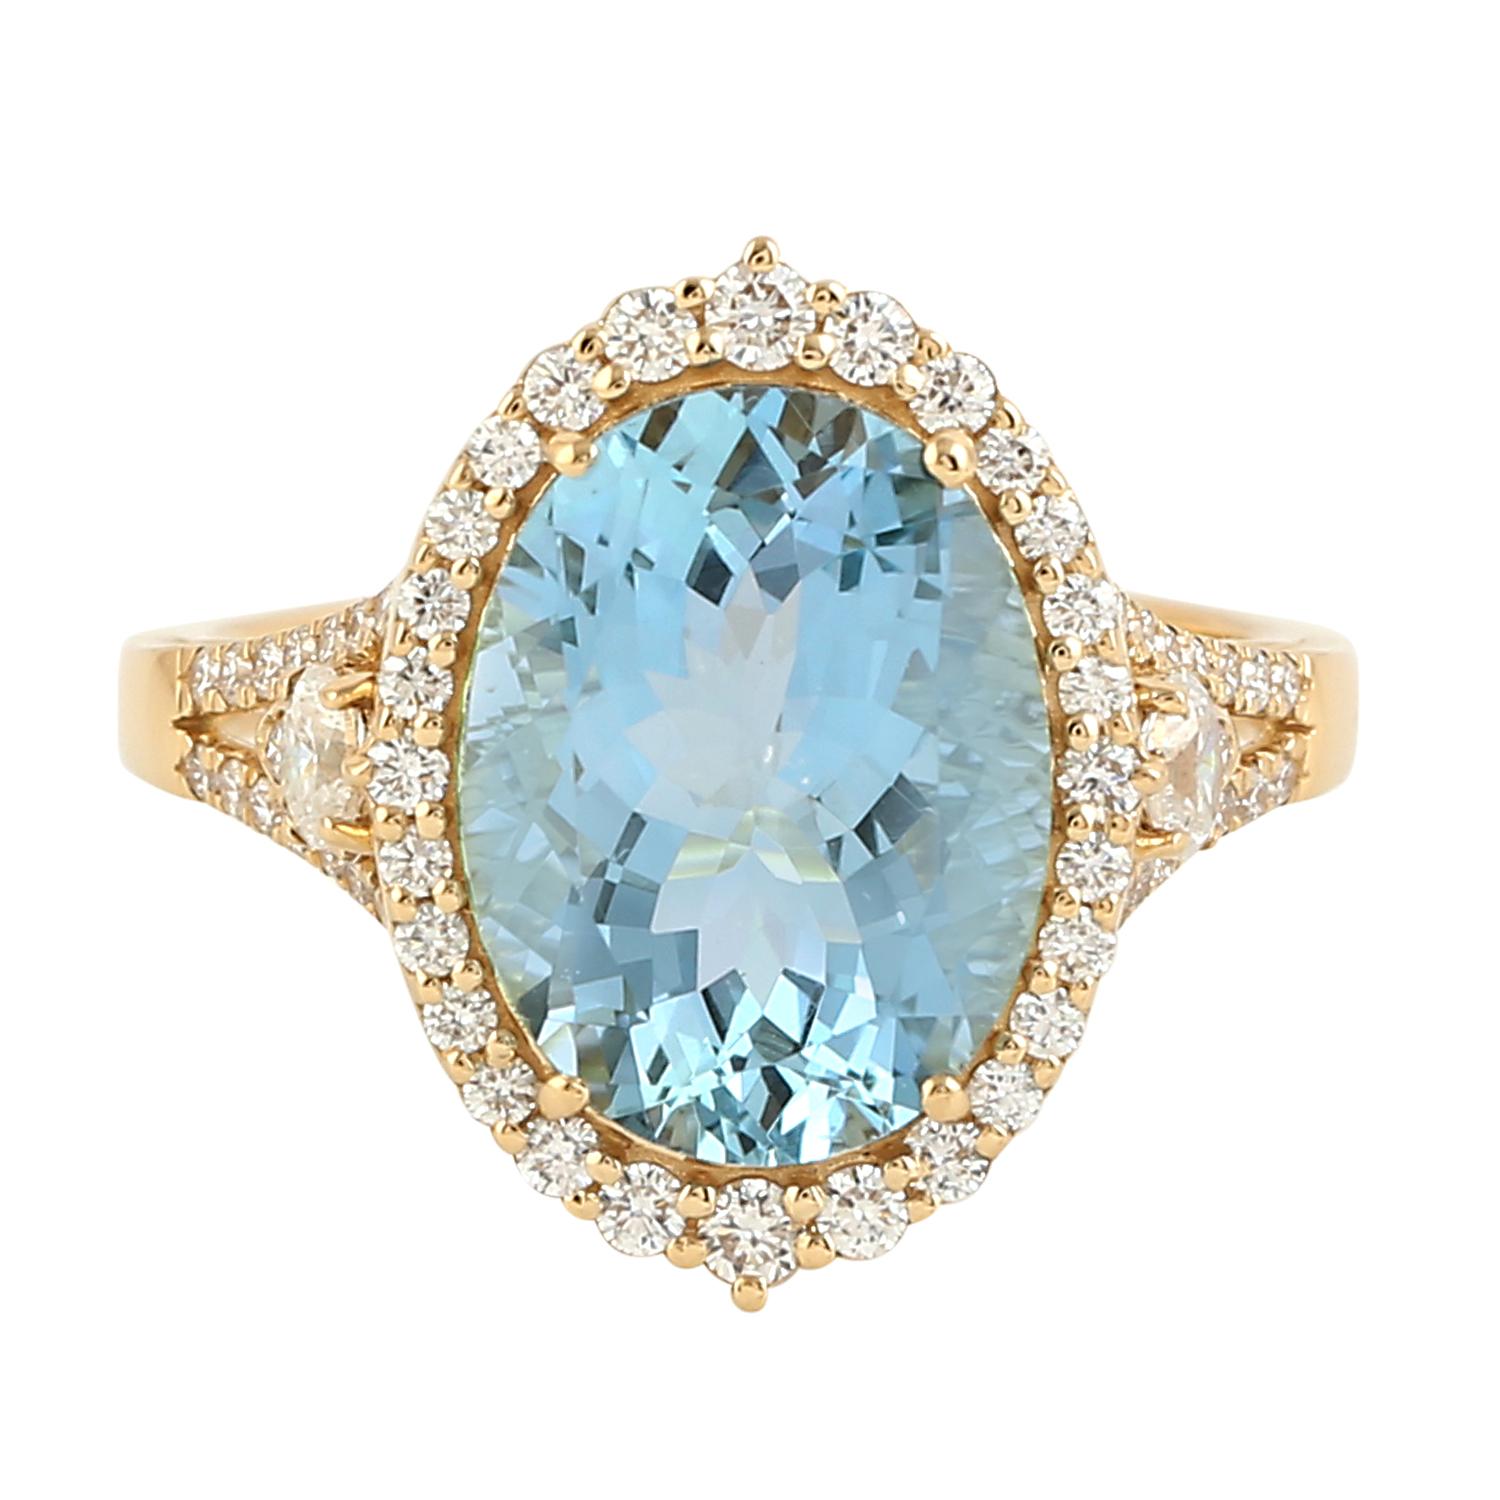 Classic Oval Shape Aquamarine Cocktail Solitaire Ring with Diamonds in 18k Yellow Gold with a designer shank is a simply beautiful.

18KT: 4.659gms
Diamond: 0.76cts
Aquamarine: 4.49cts